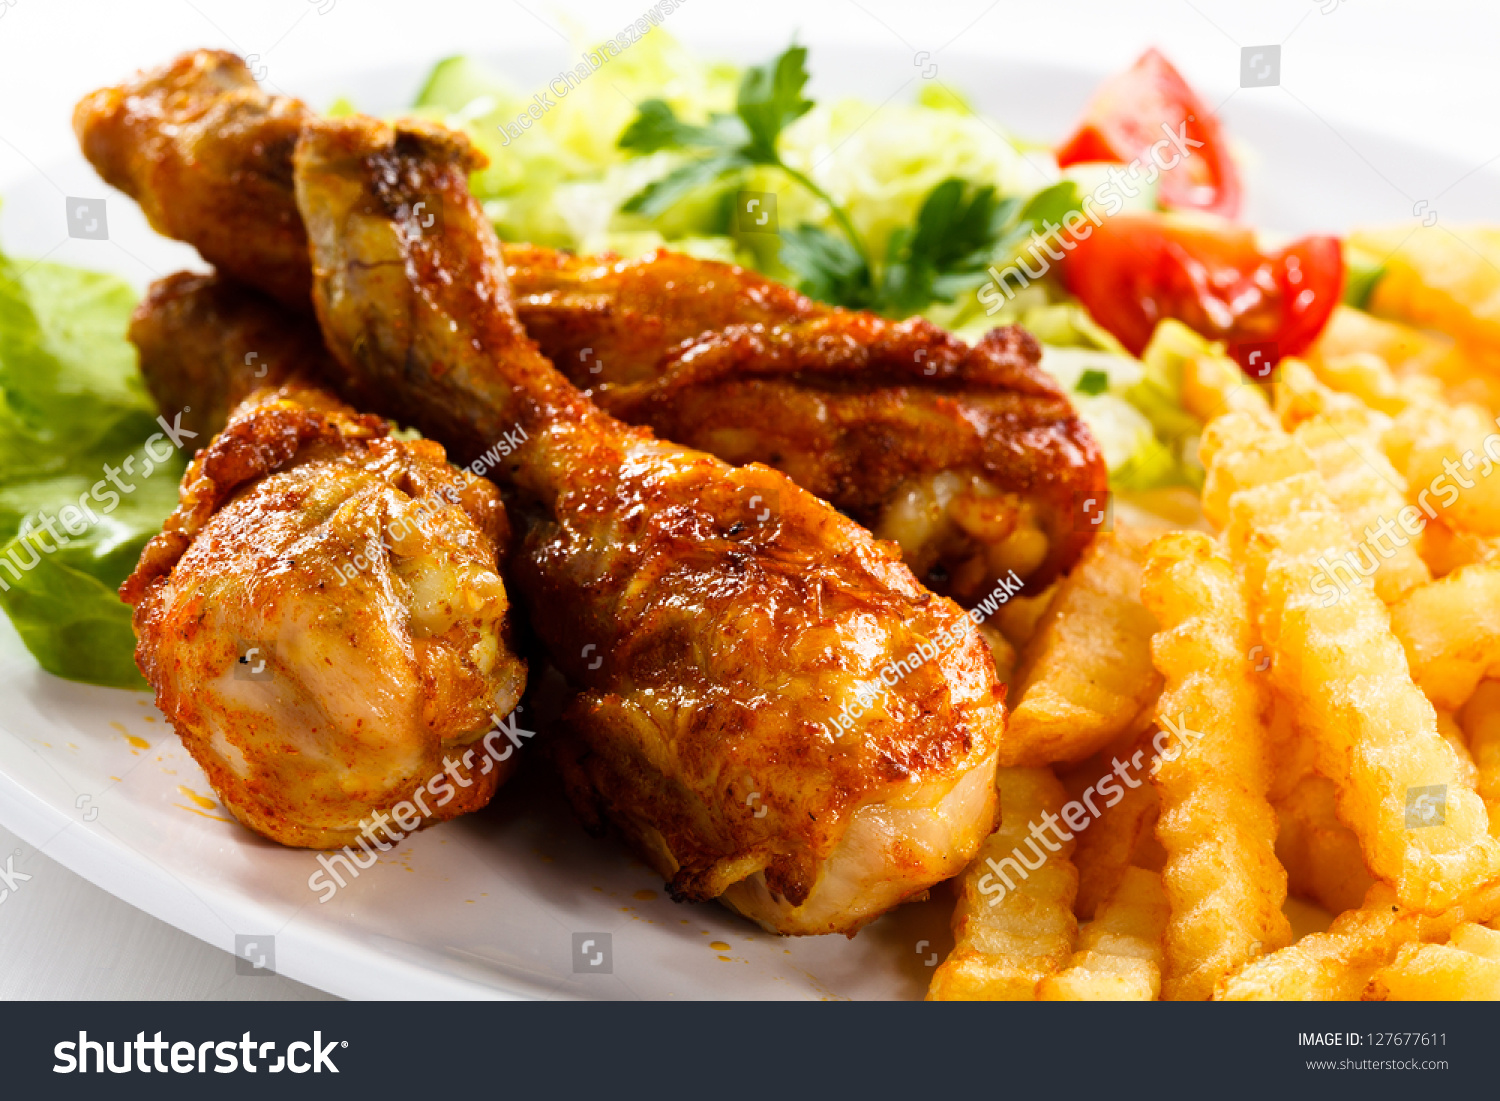 Grilled Chicken Legs With Chips And Vegetables Stock Photo 127677611 ...